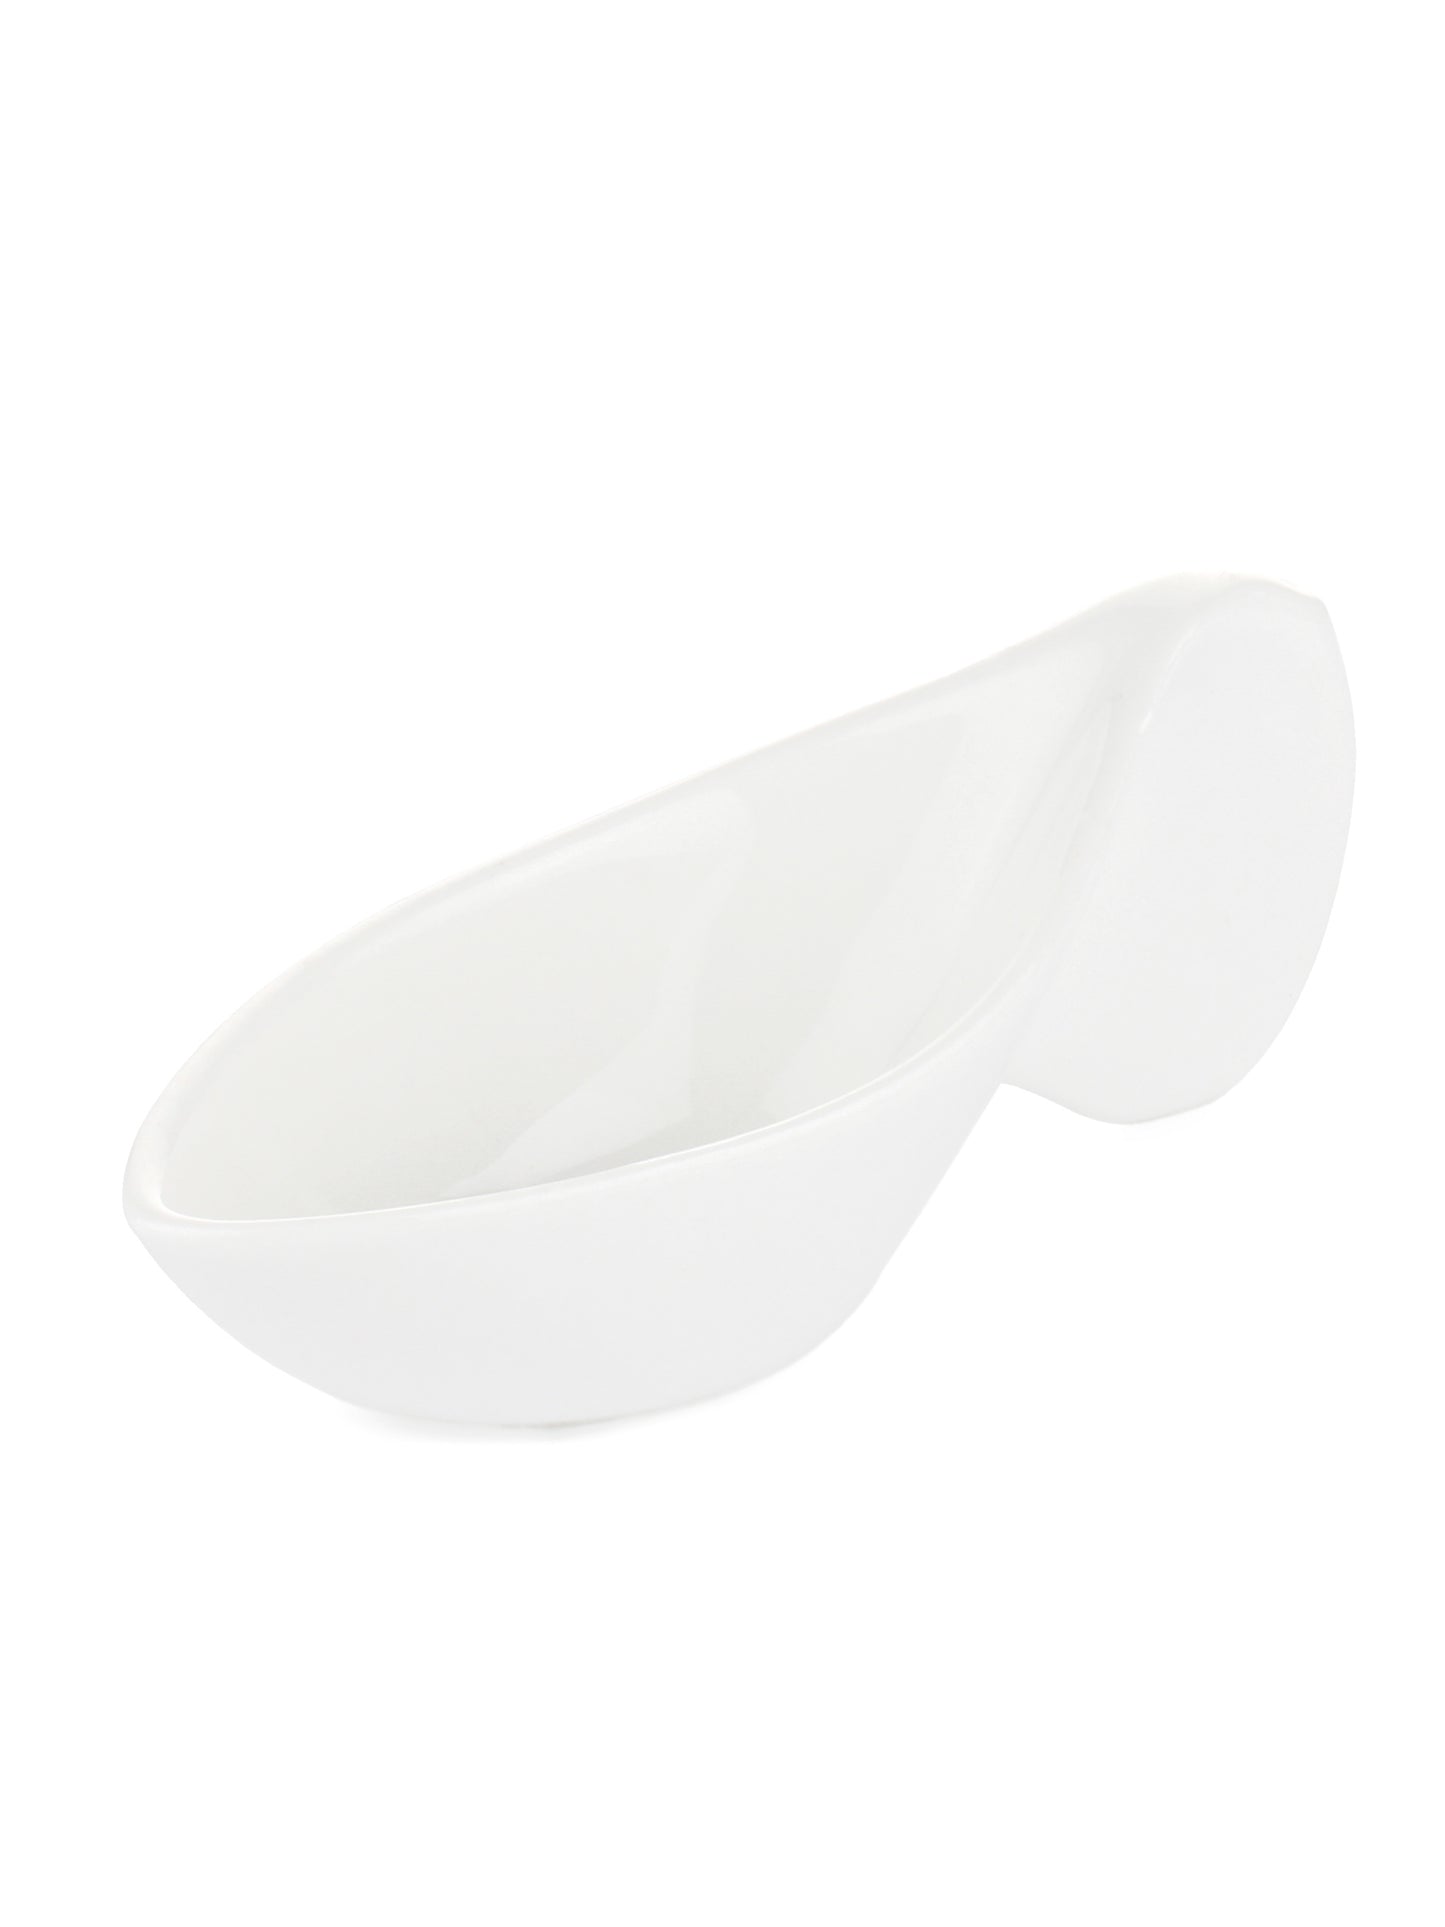 Clay Craft Small Condiment/Dipping Bowls Set of 4 - 50 ml each